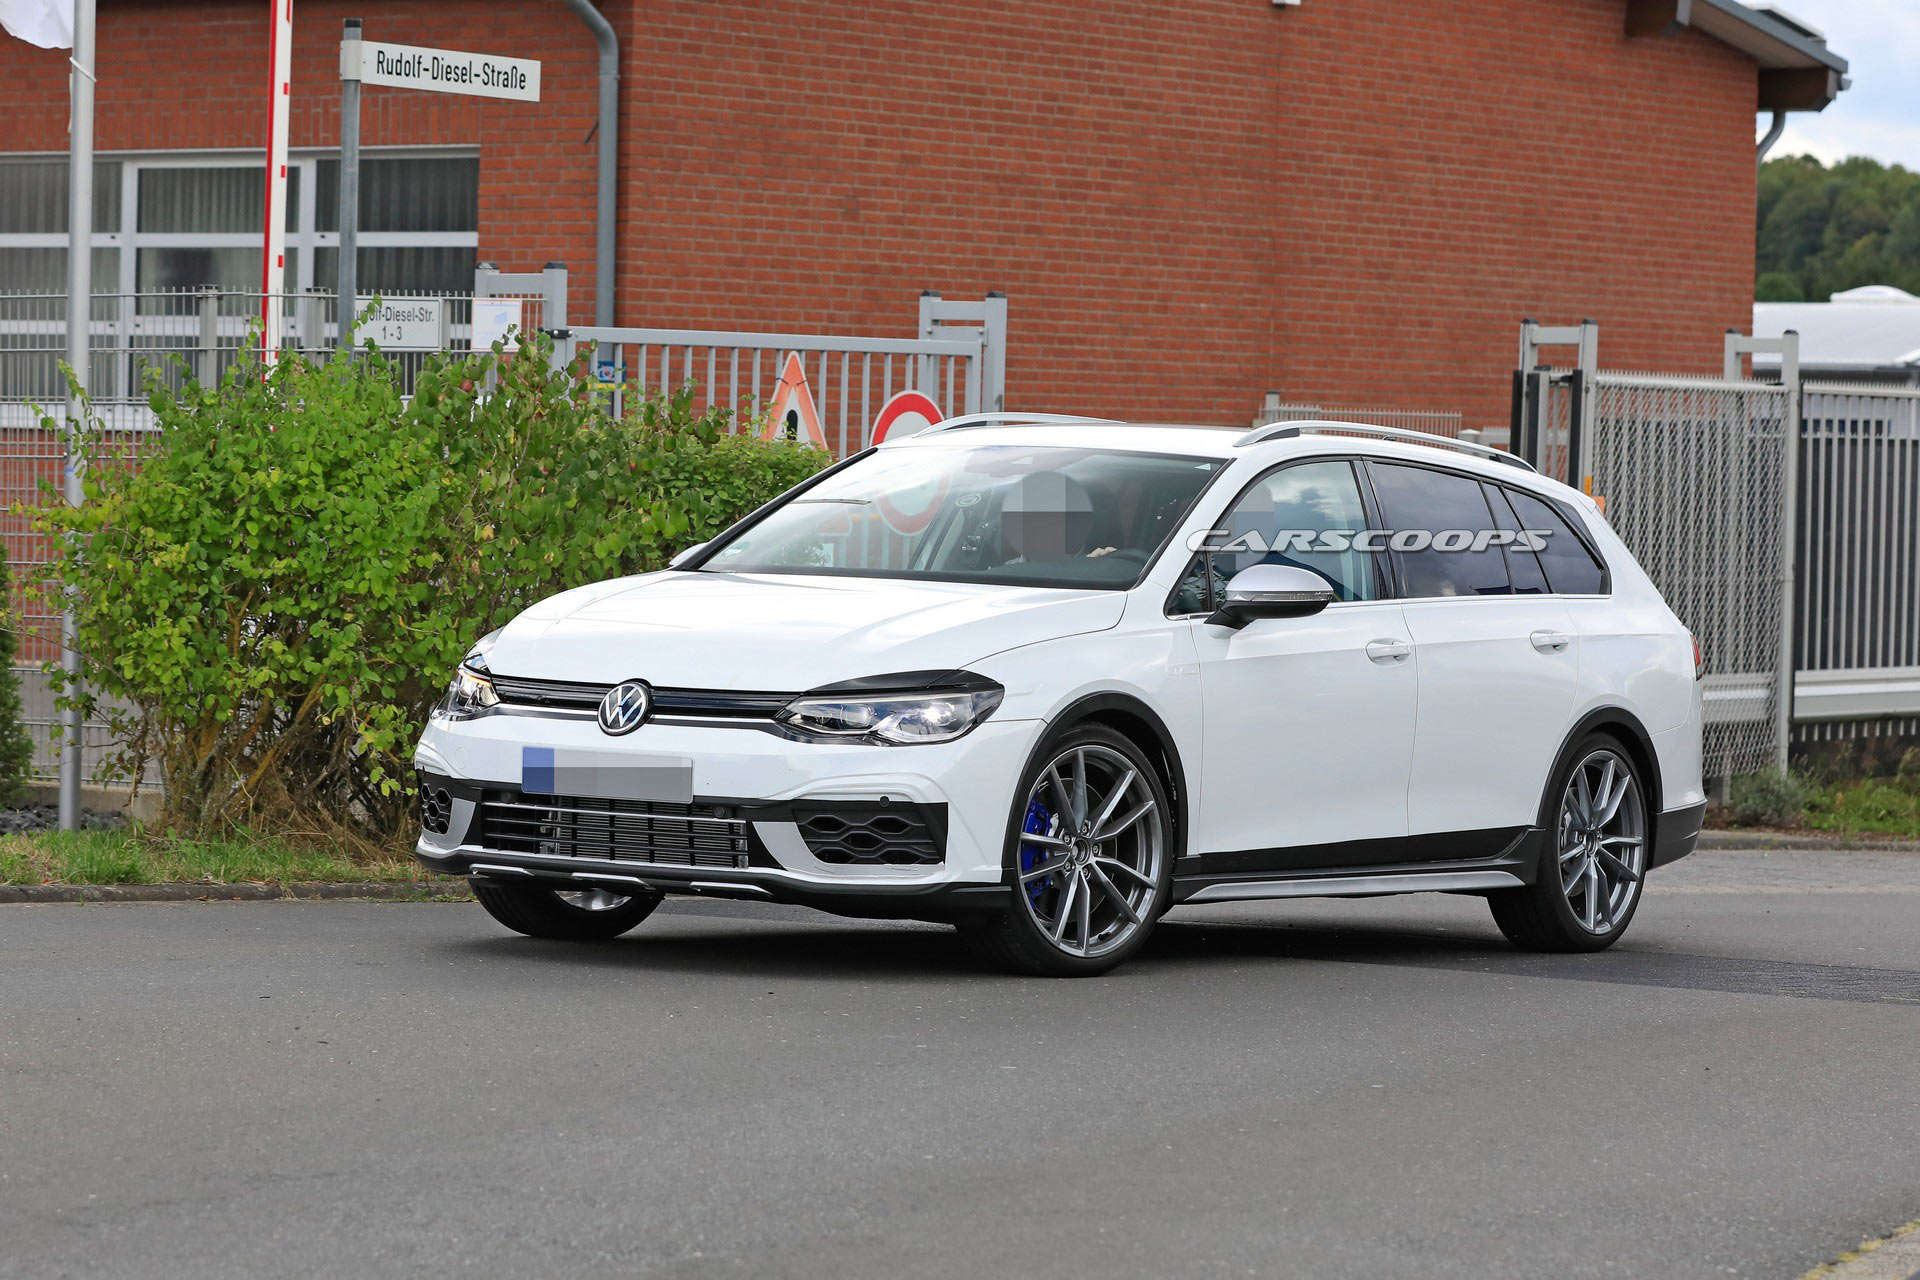 New VW Golf R Estate Spied Posing As An Alltrack | Carscoops